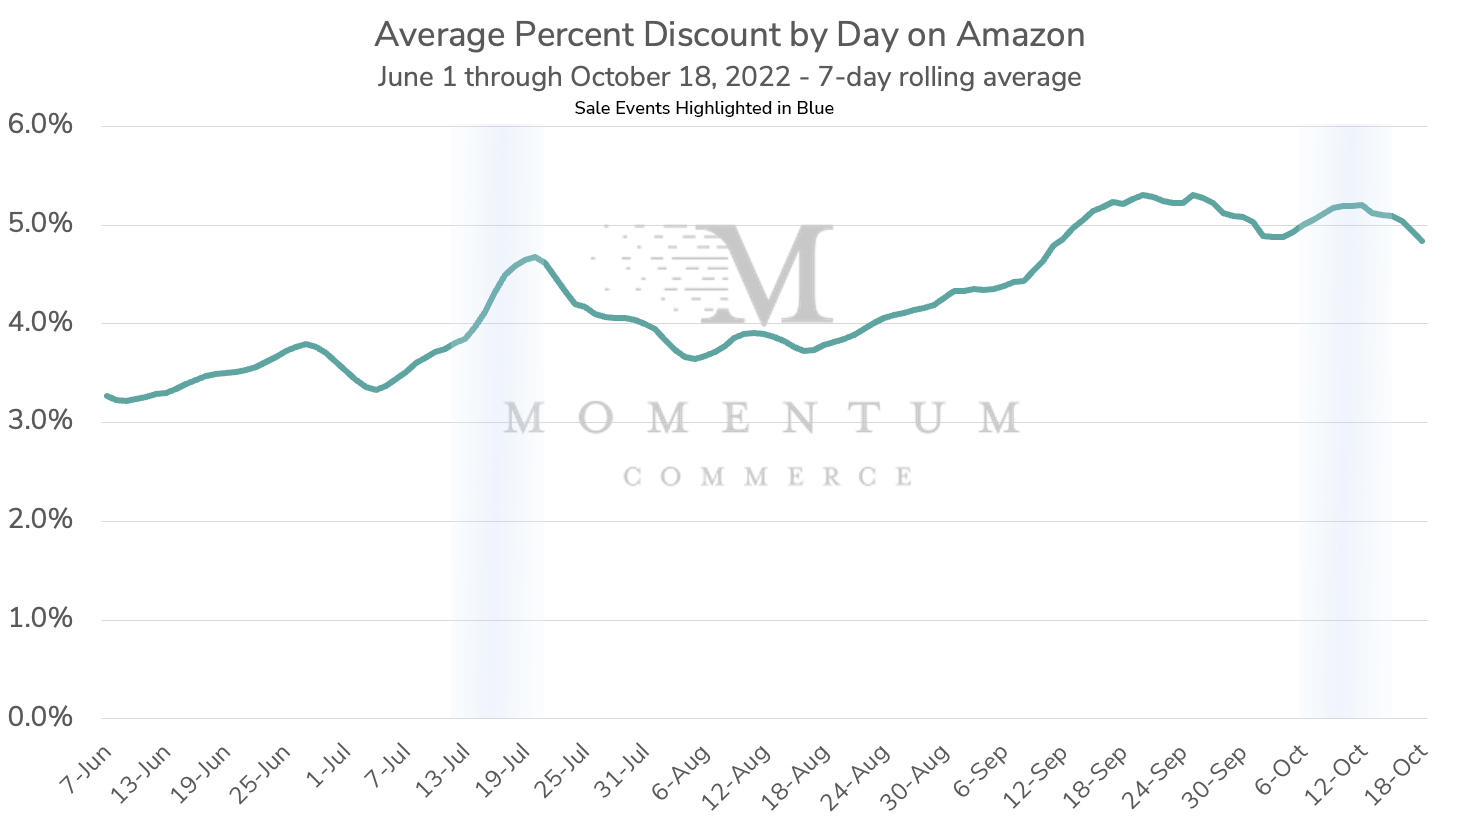 Average Percent Discount by Day on Amazon